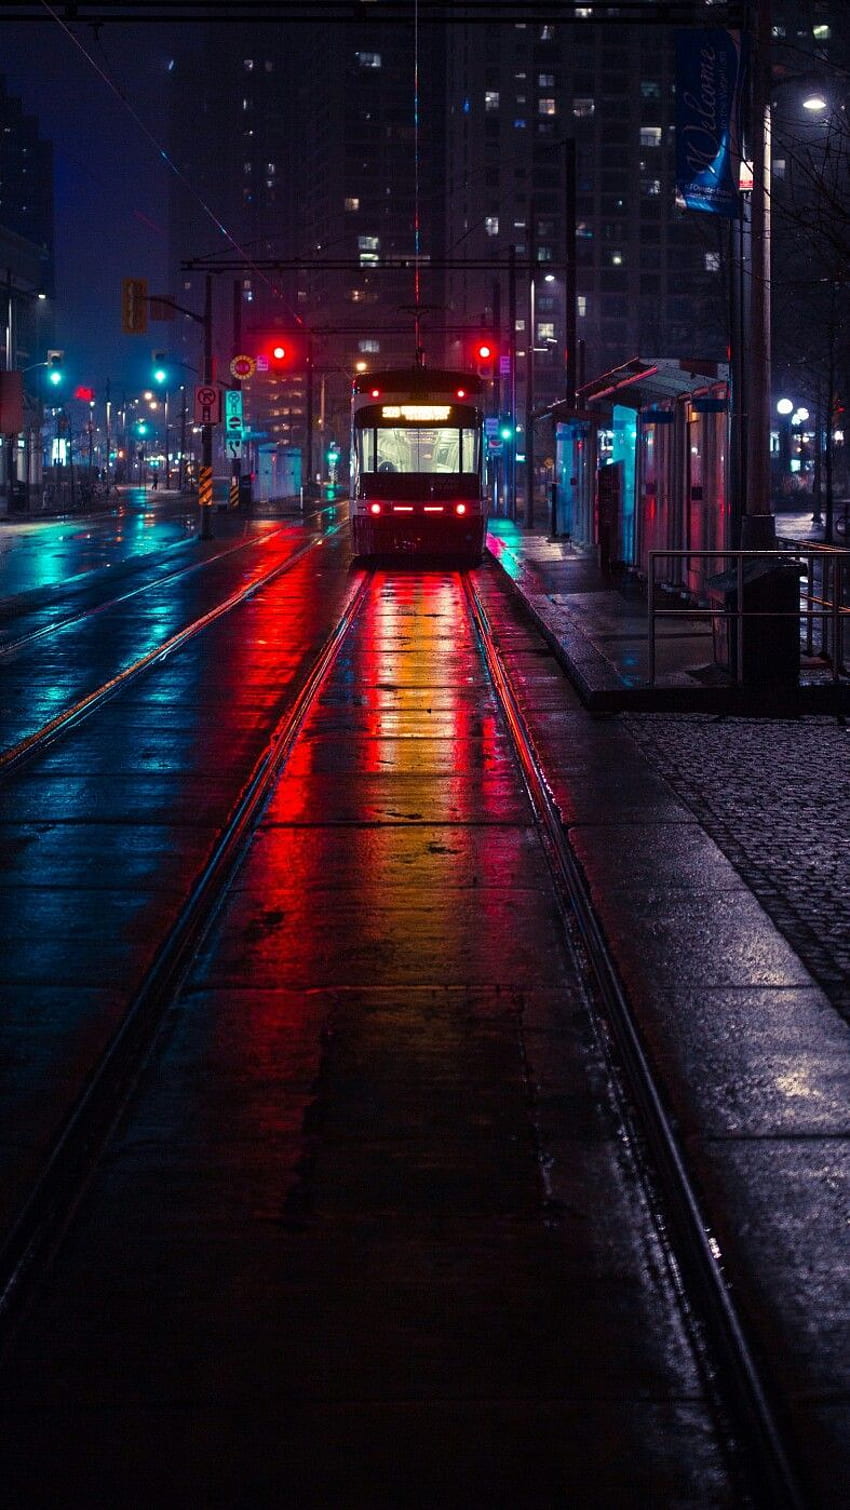 sɴɪᴇɢᴅᴇᴊᴀ on Phone . City , Urban landscape, Night graphy, Cool Aesthetic Places HD phone wallpaper